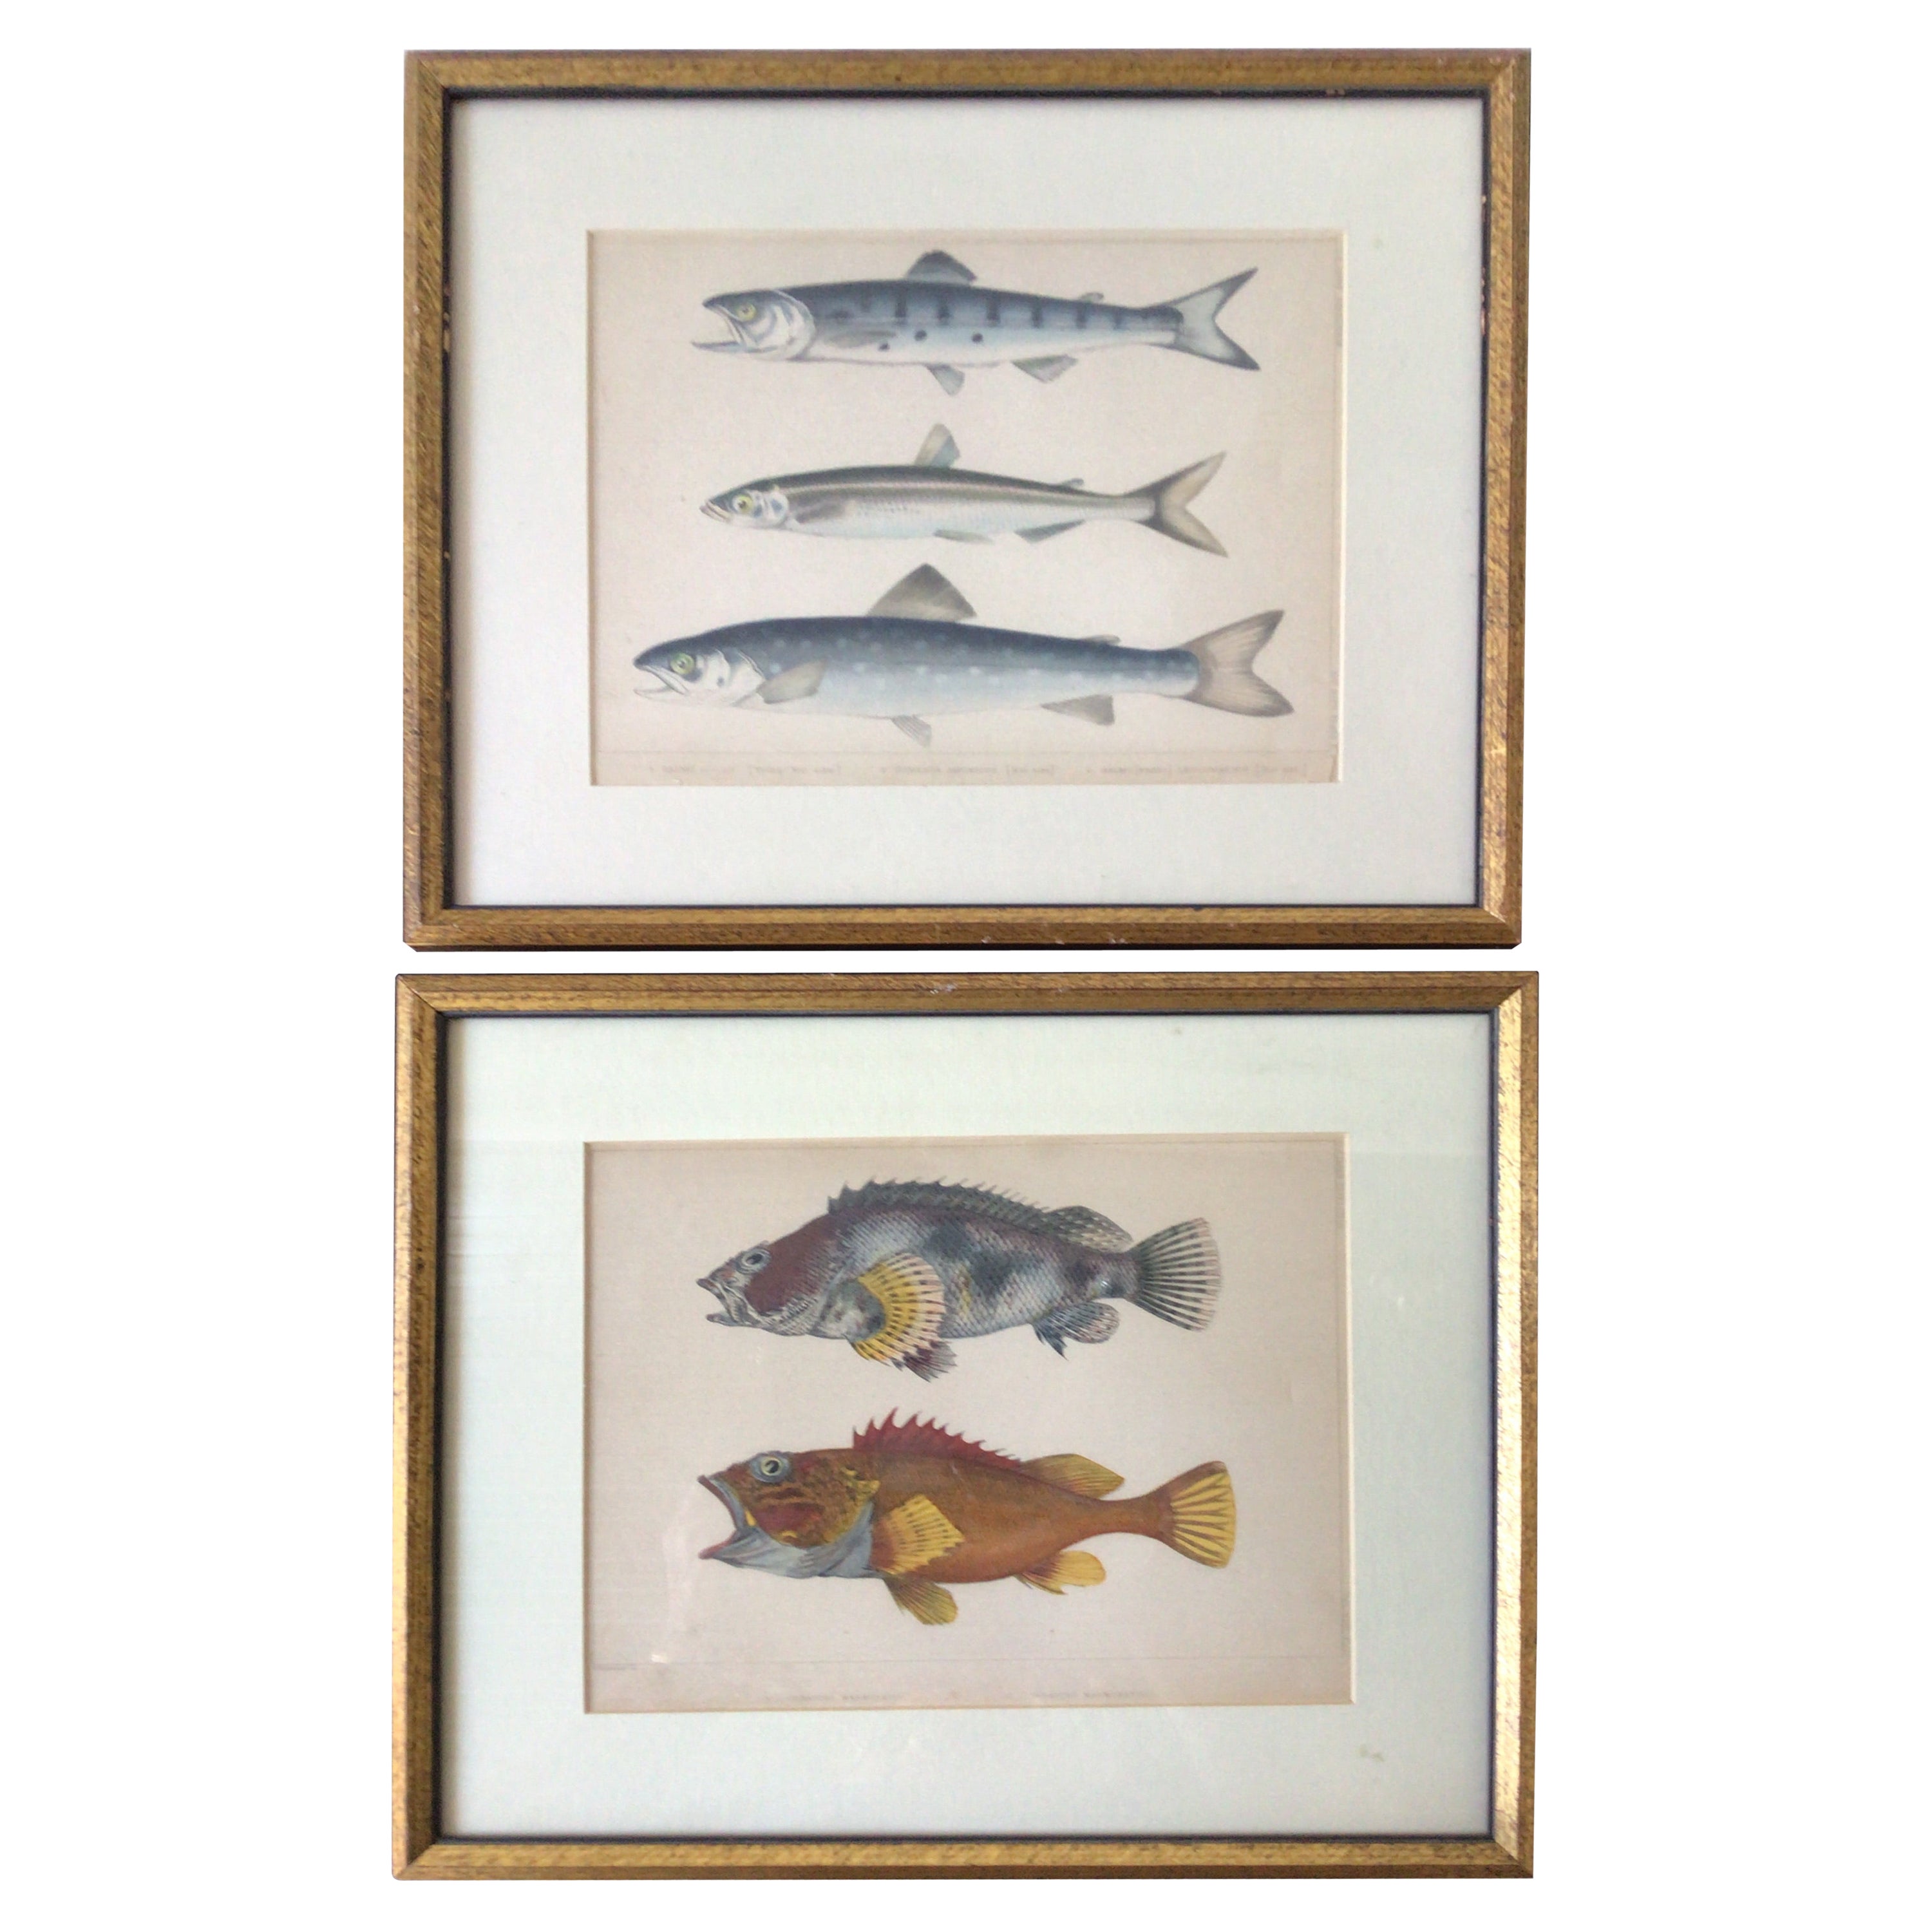 Pair of 1850s Fish Prints from the US Japan Expedition